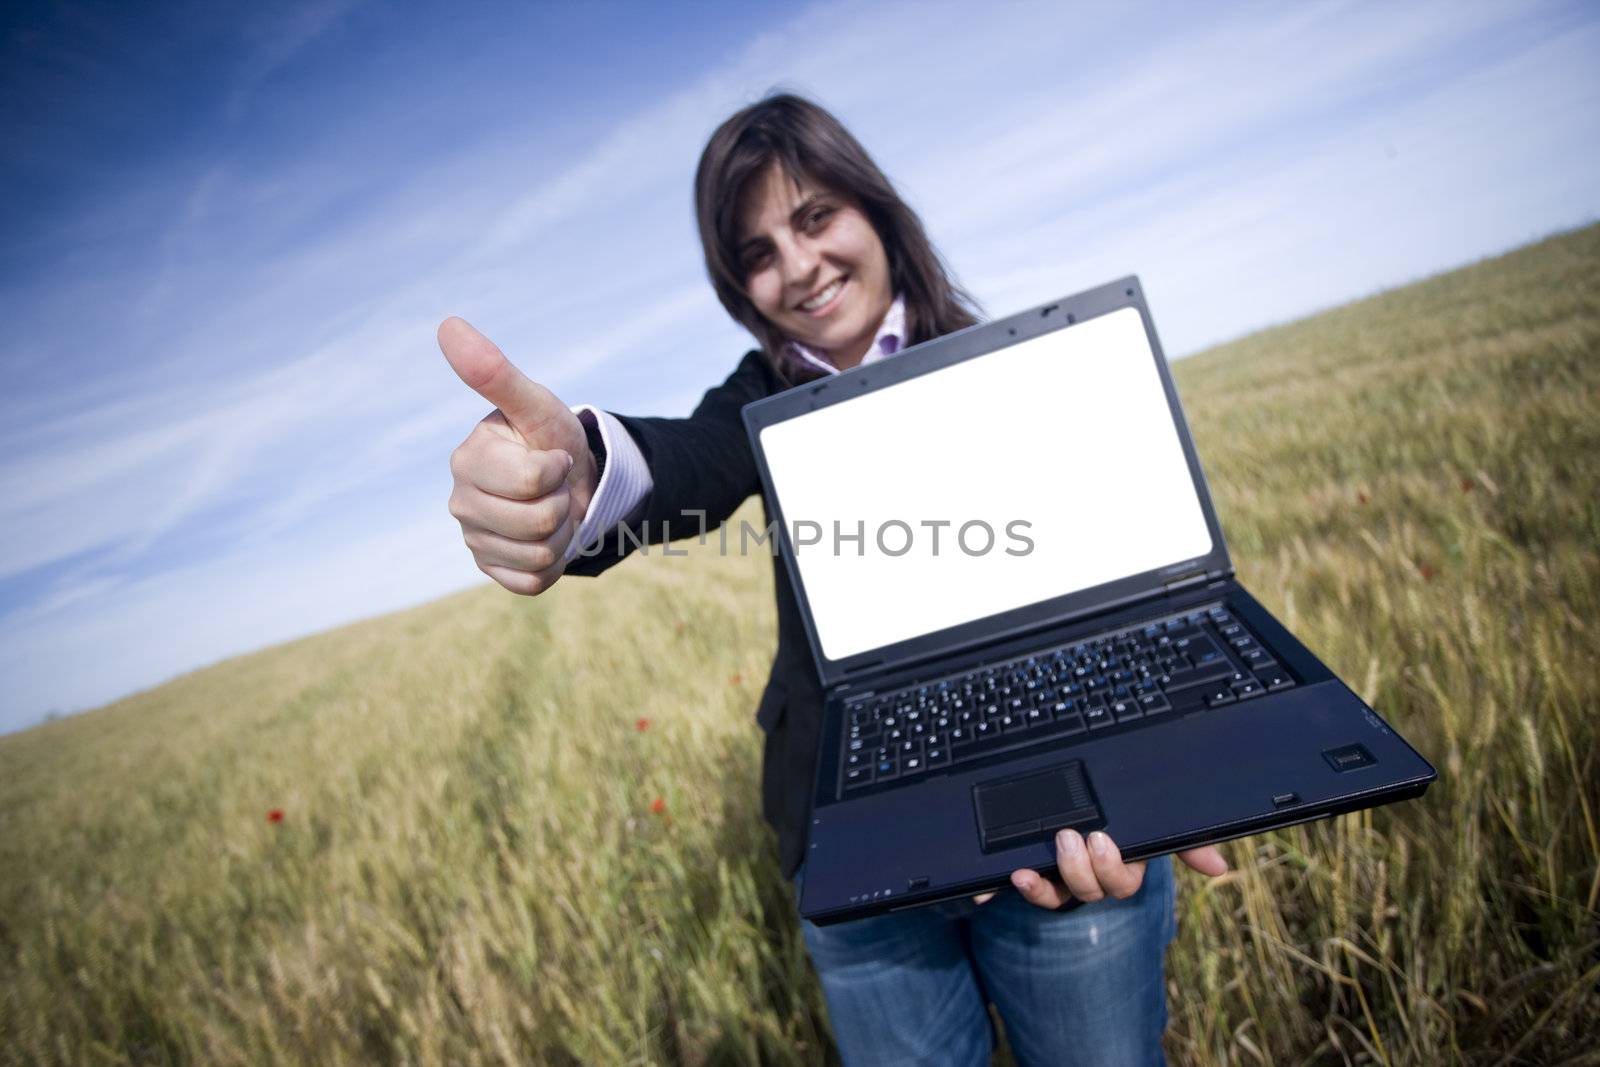 young businesswoman outdoor with laptop - focus on the hand and laptop